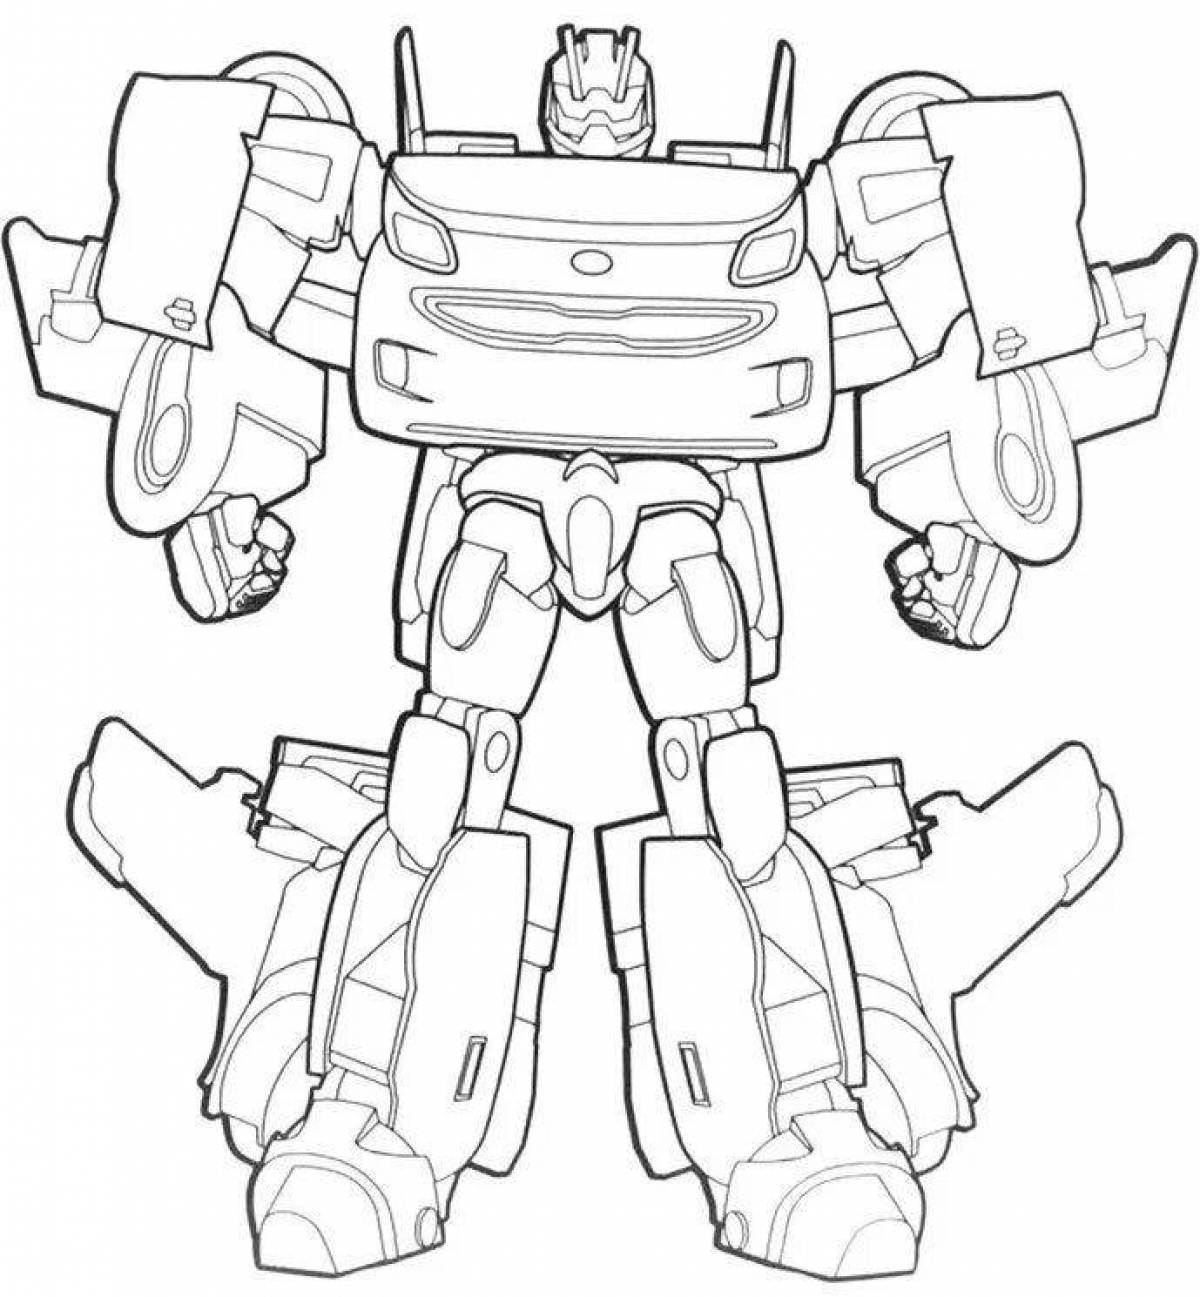 Tobot x playful coloring page